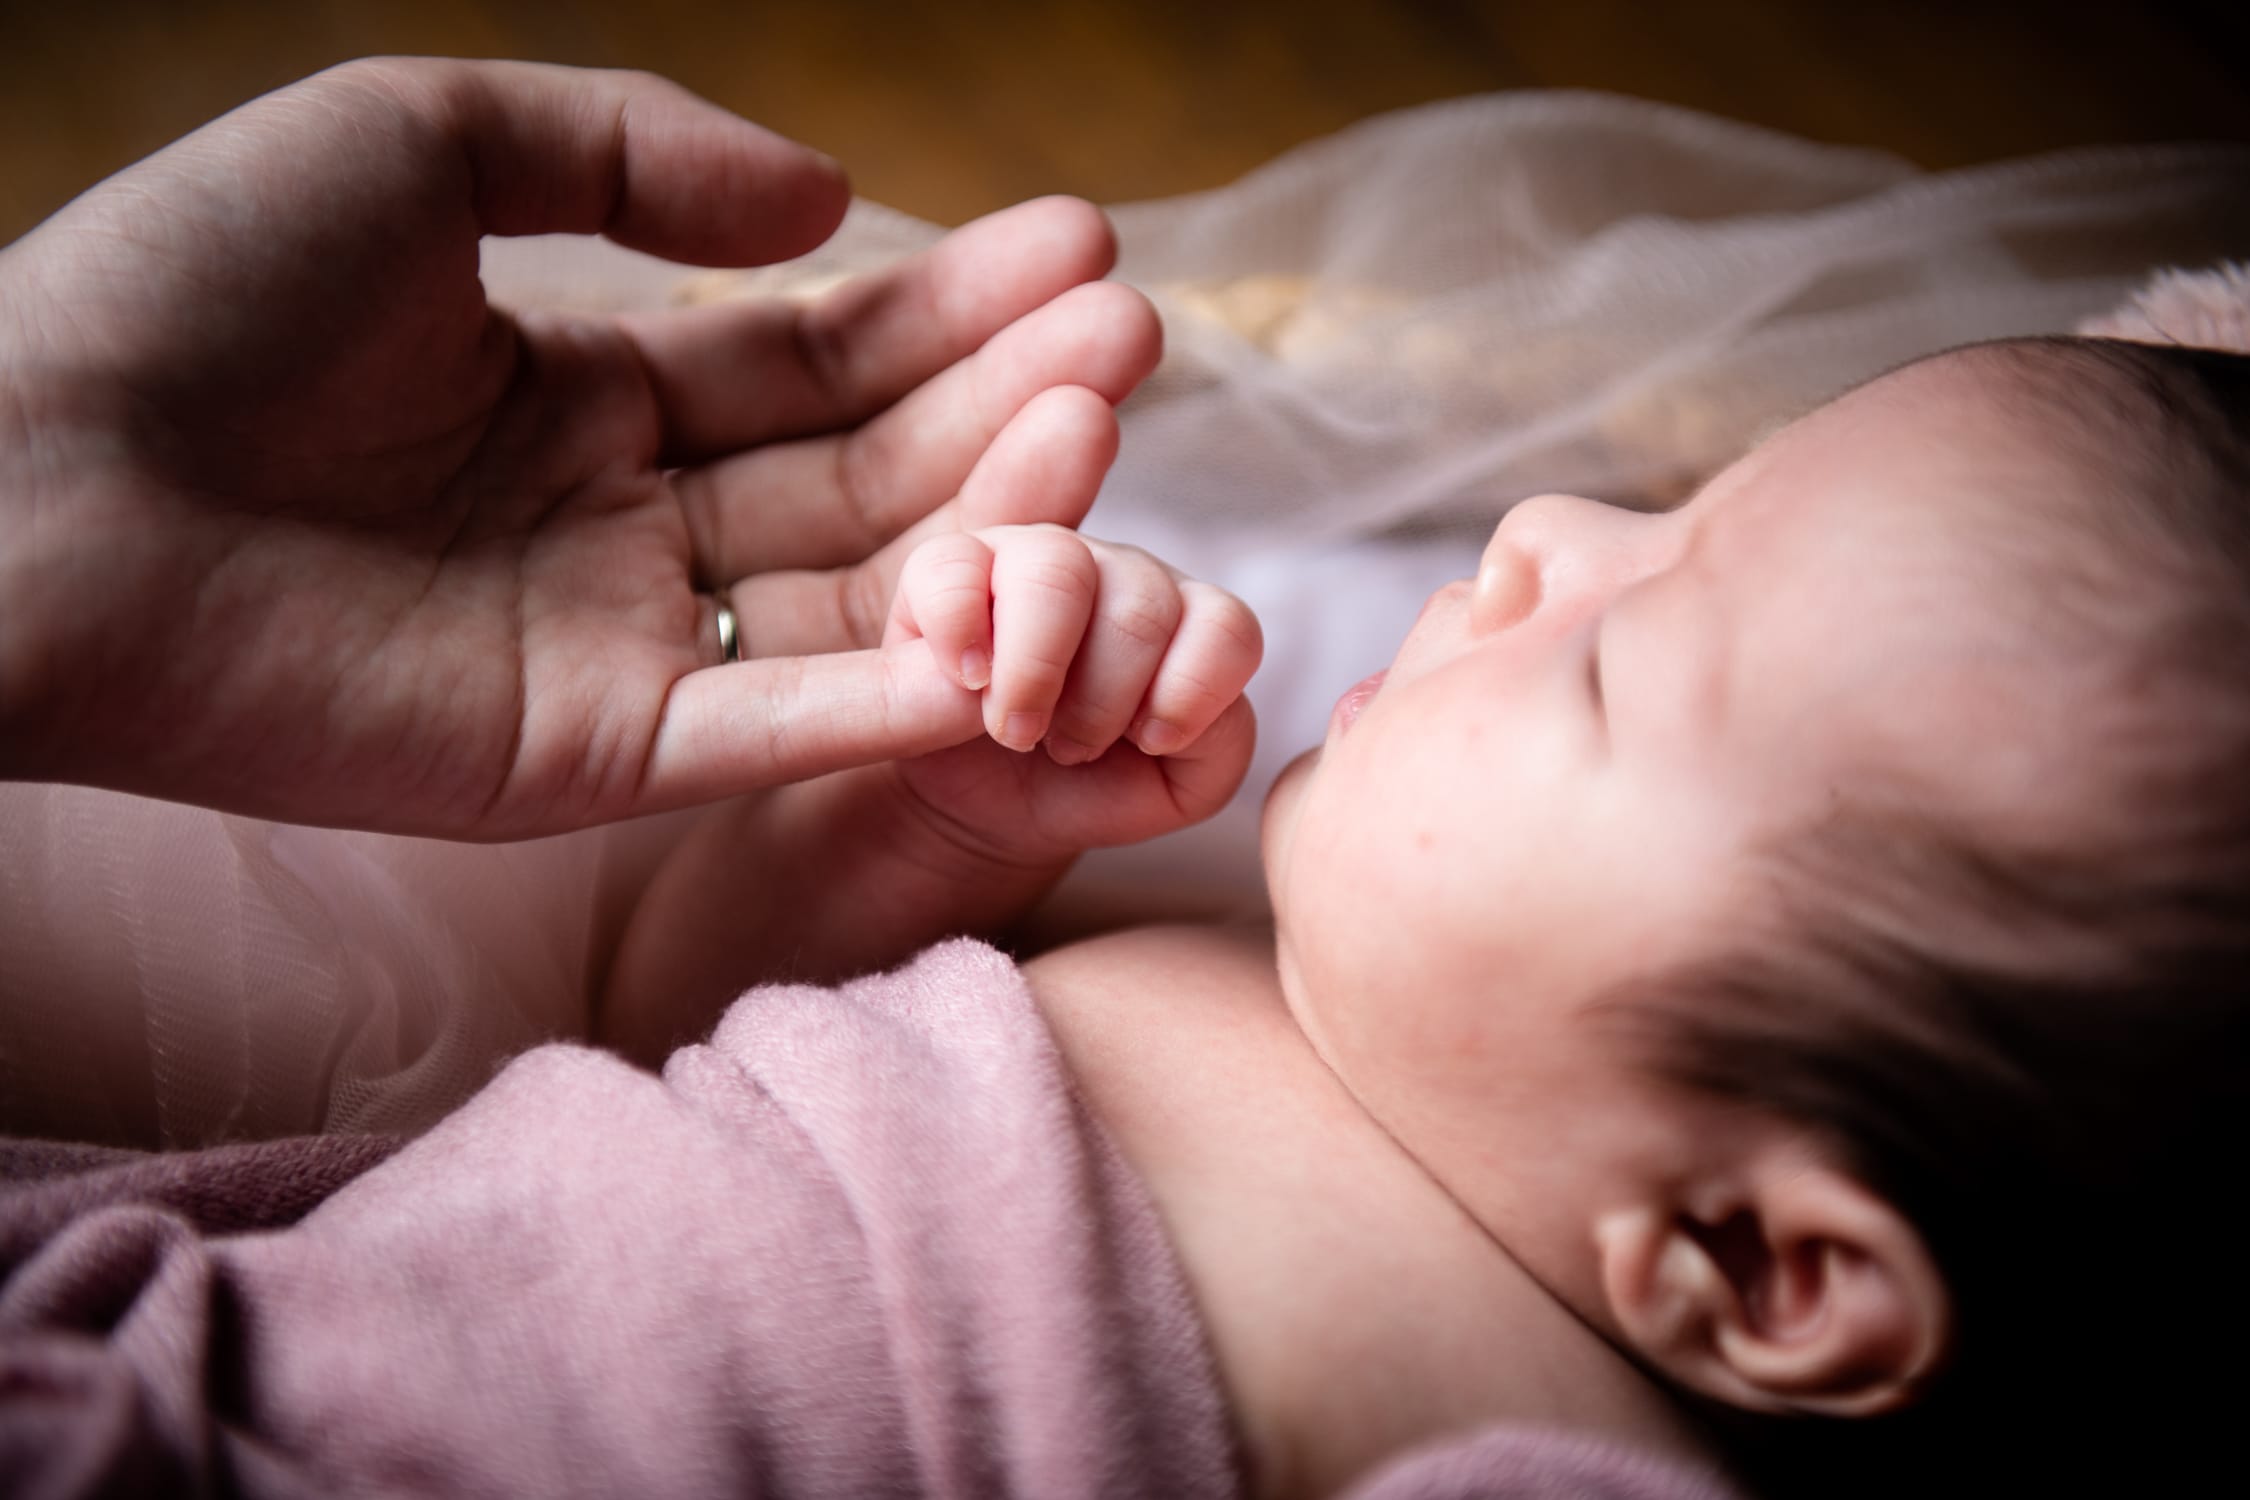 Sleeping newborn baby holding mother's hand in a photography studio setting during a natural light newborn photoshoot in Singapore, White Room Studio. Credit: White Room Studio Pte Ltd